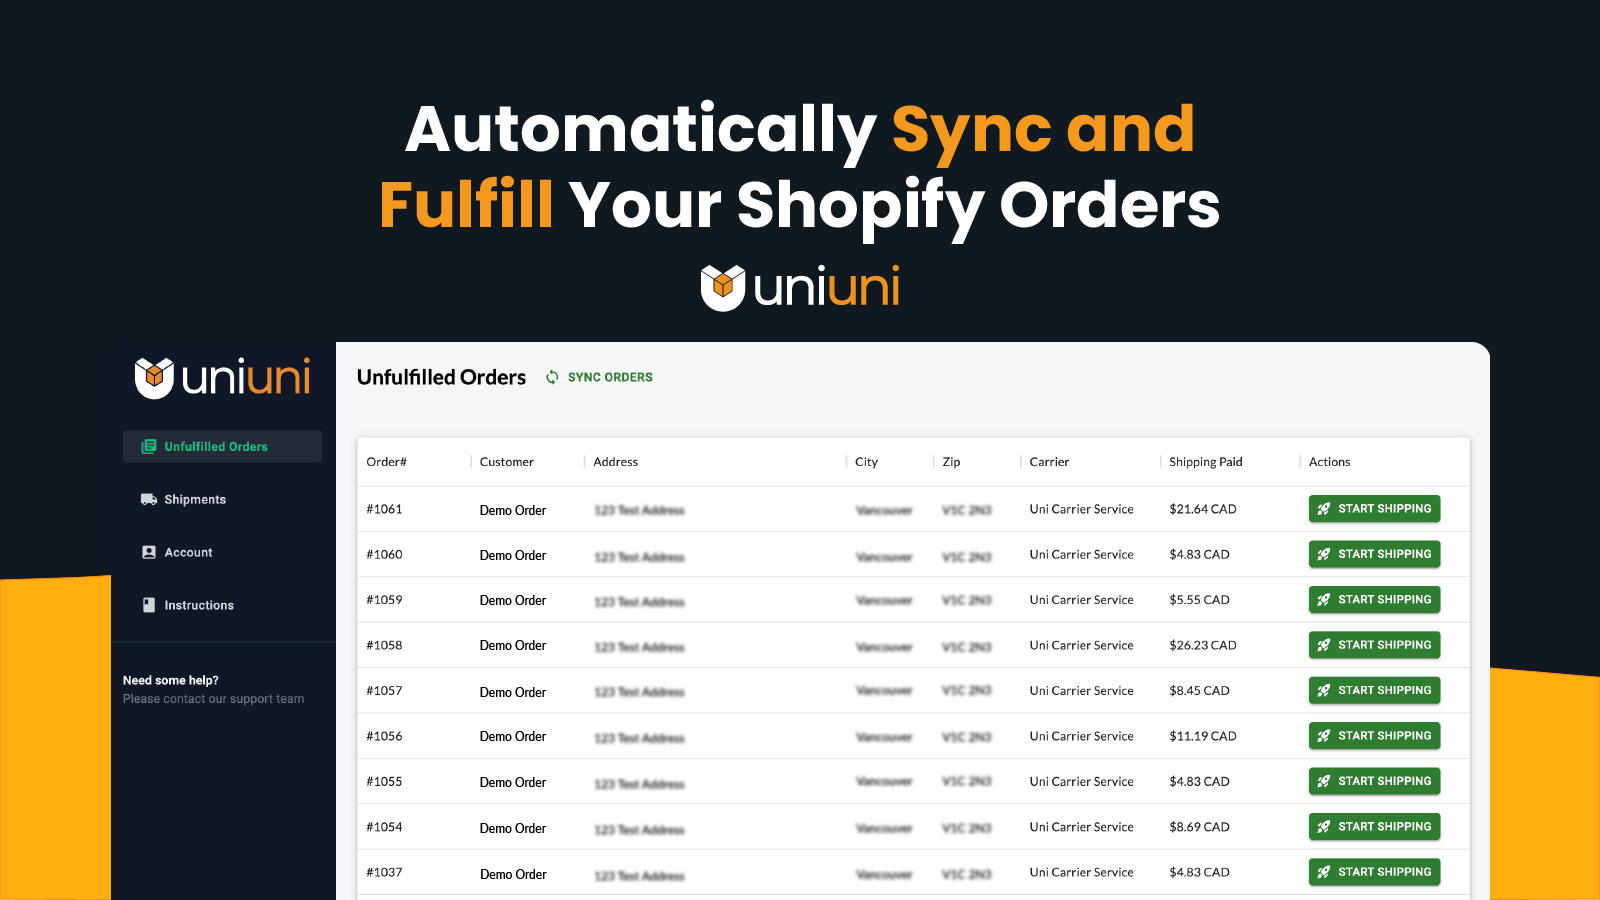 Automatically sync and fulfill your shopify orders